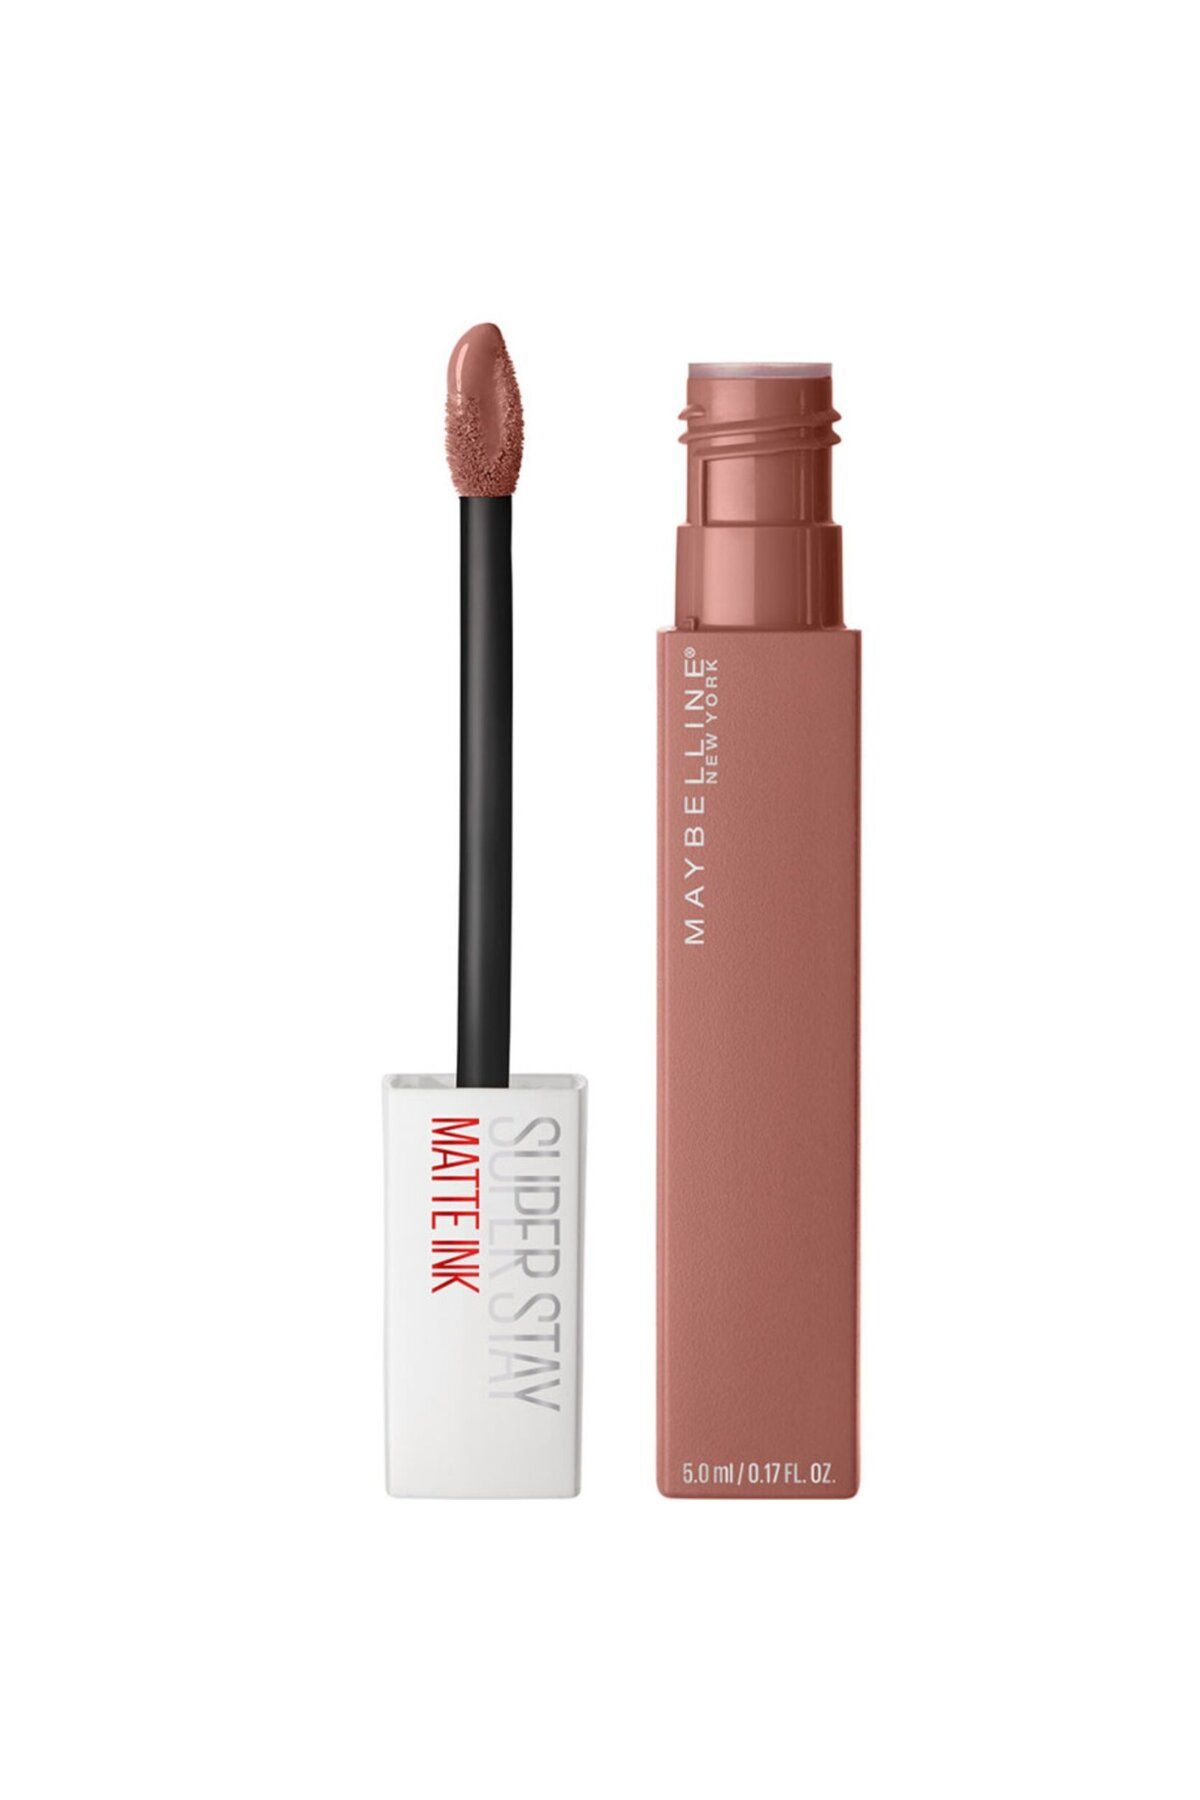 Maybelline New York Super Stay Matte Ink Likit Mat Ruj - 65 Seductress - Nude